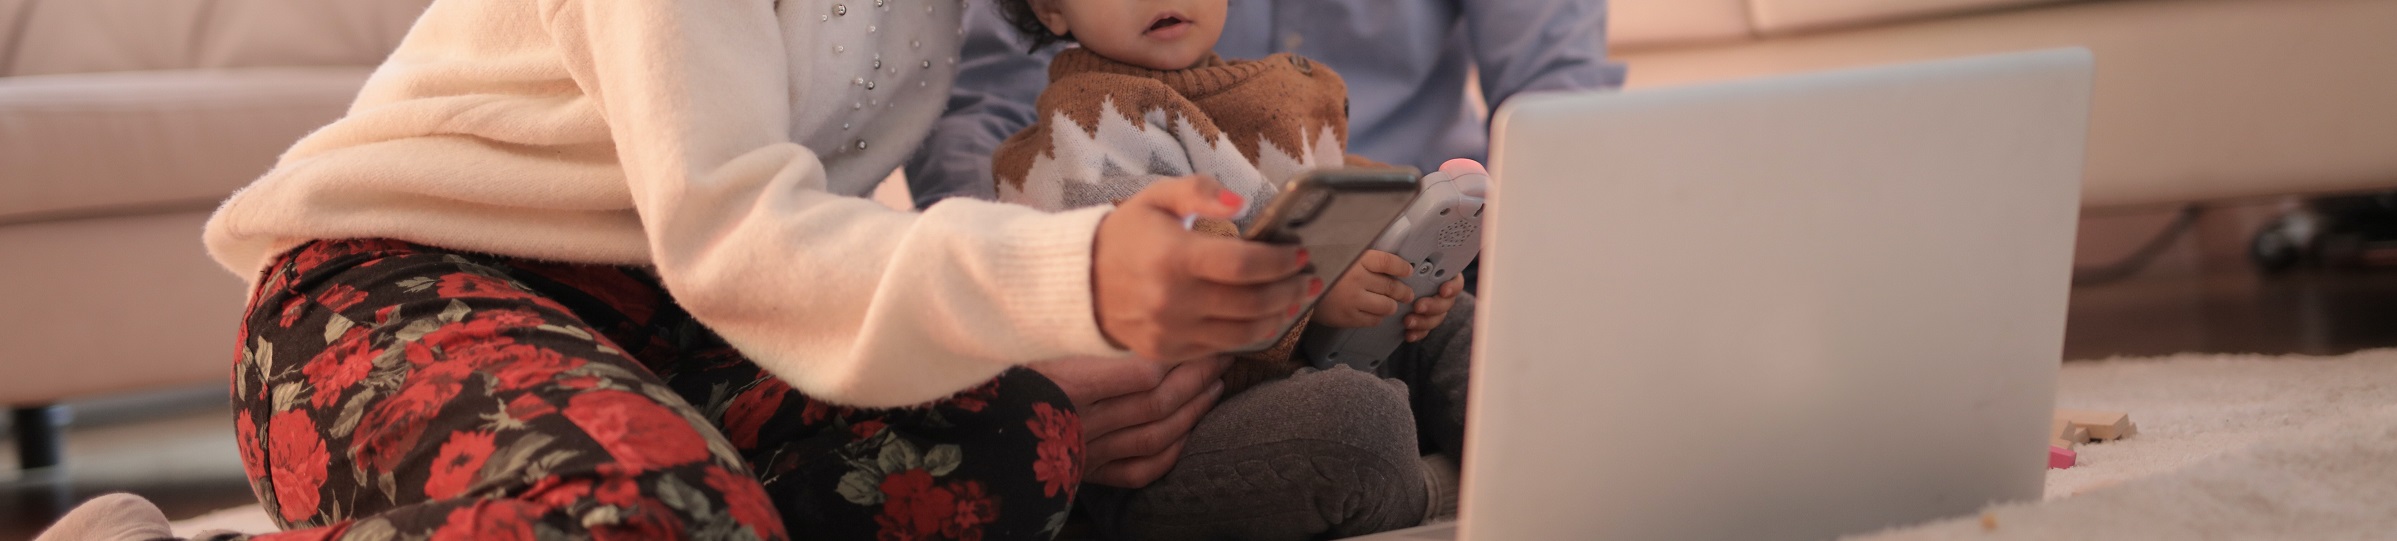 photo-of-woman-using-smartphone-while-sitting-near-her-baby-3820159